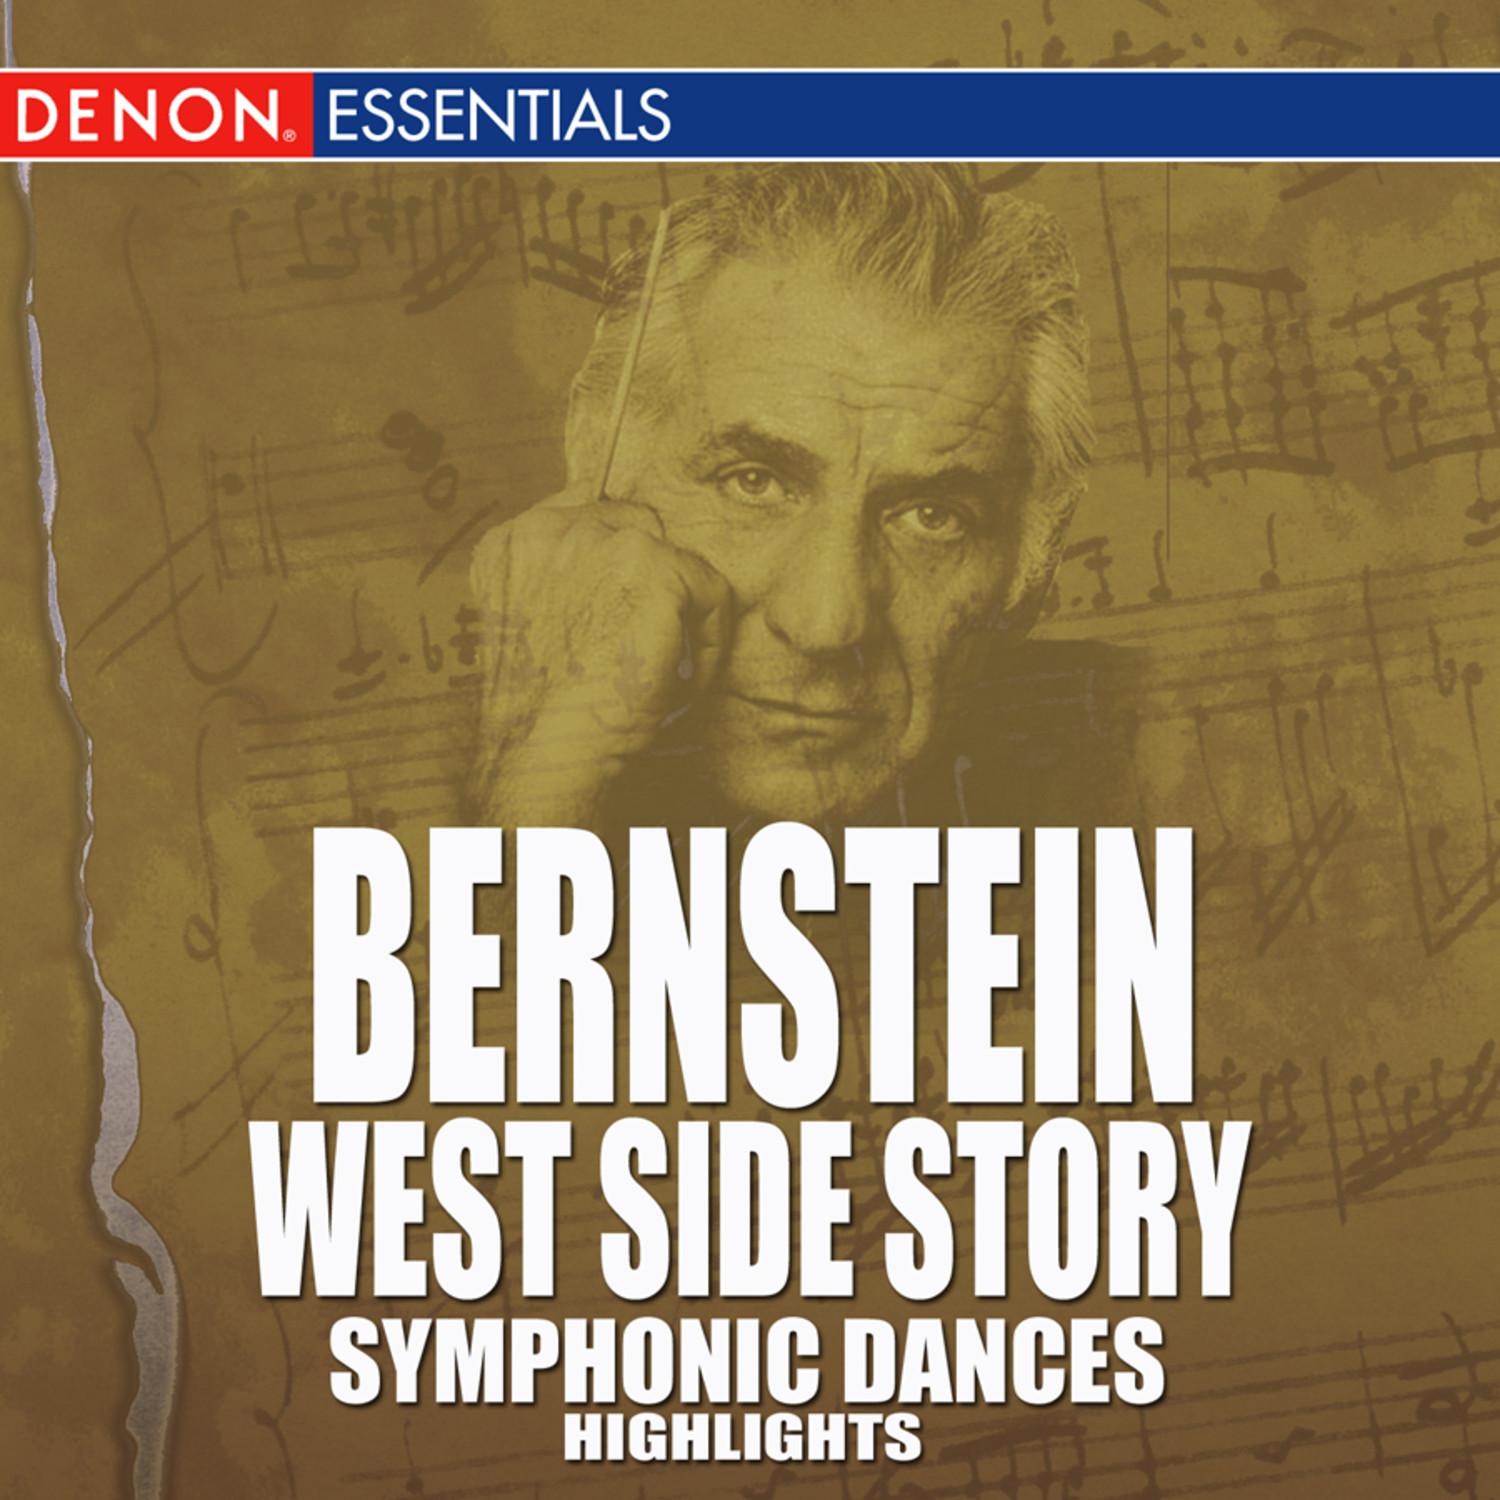 Symphonic Dances from "West Side Story"